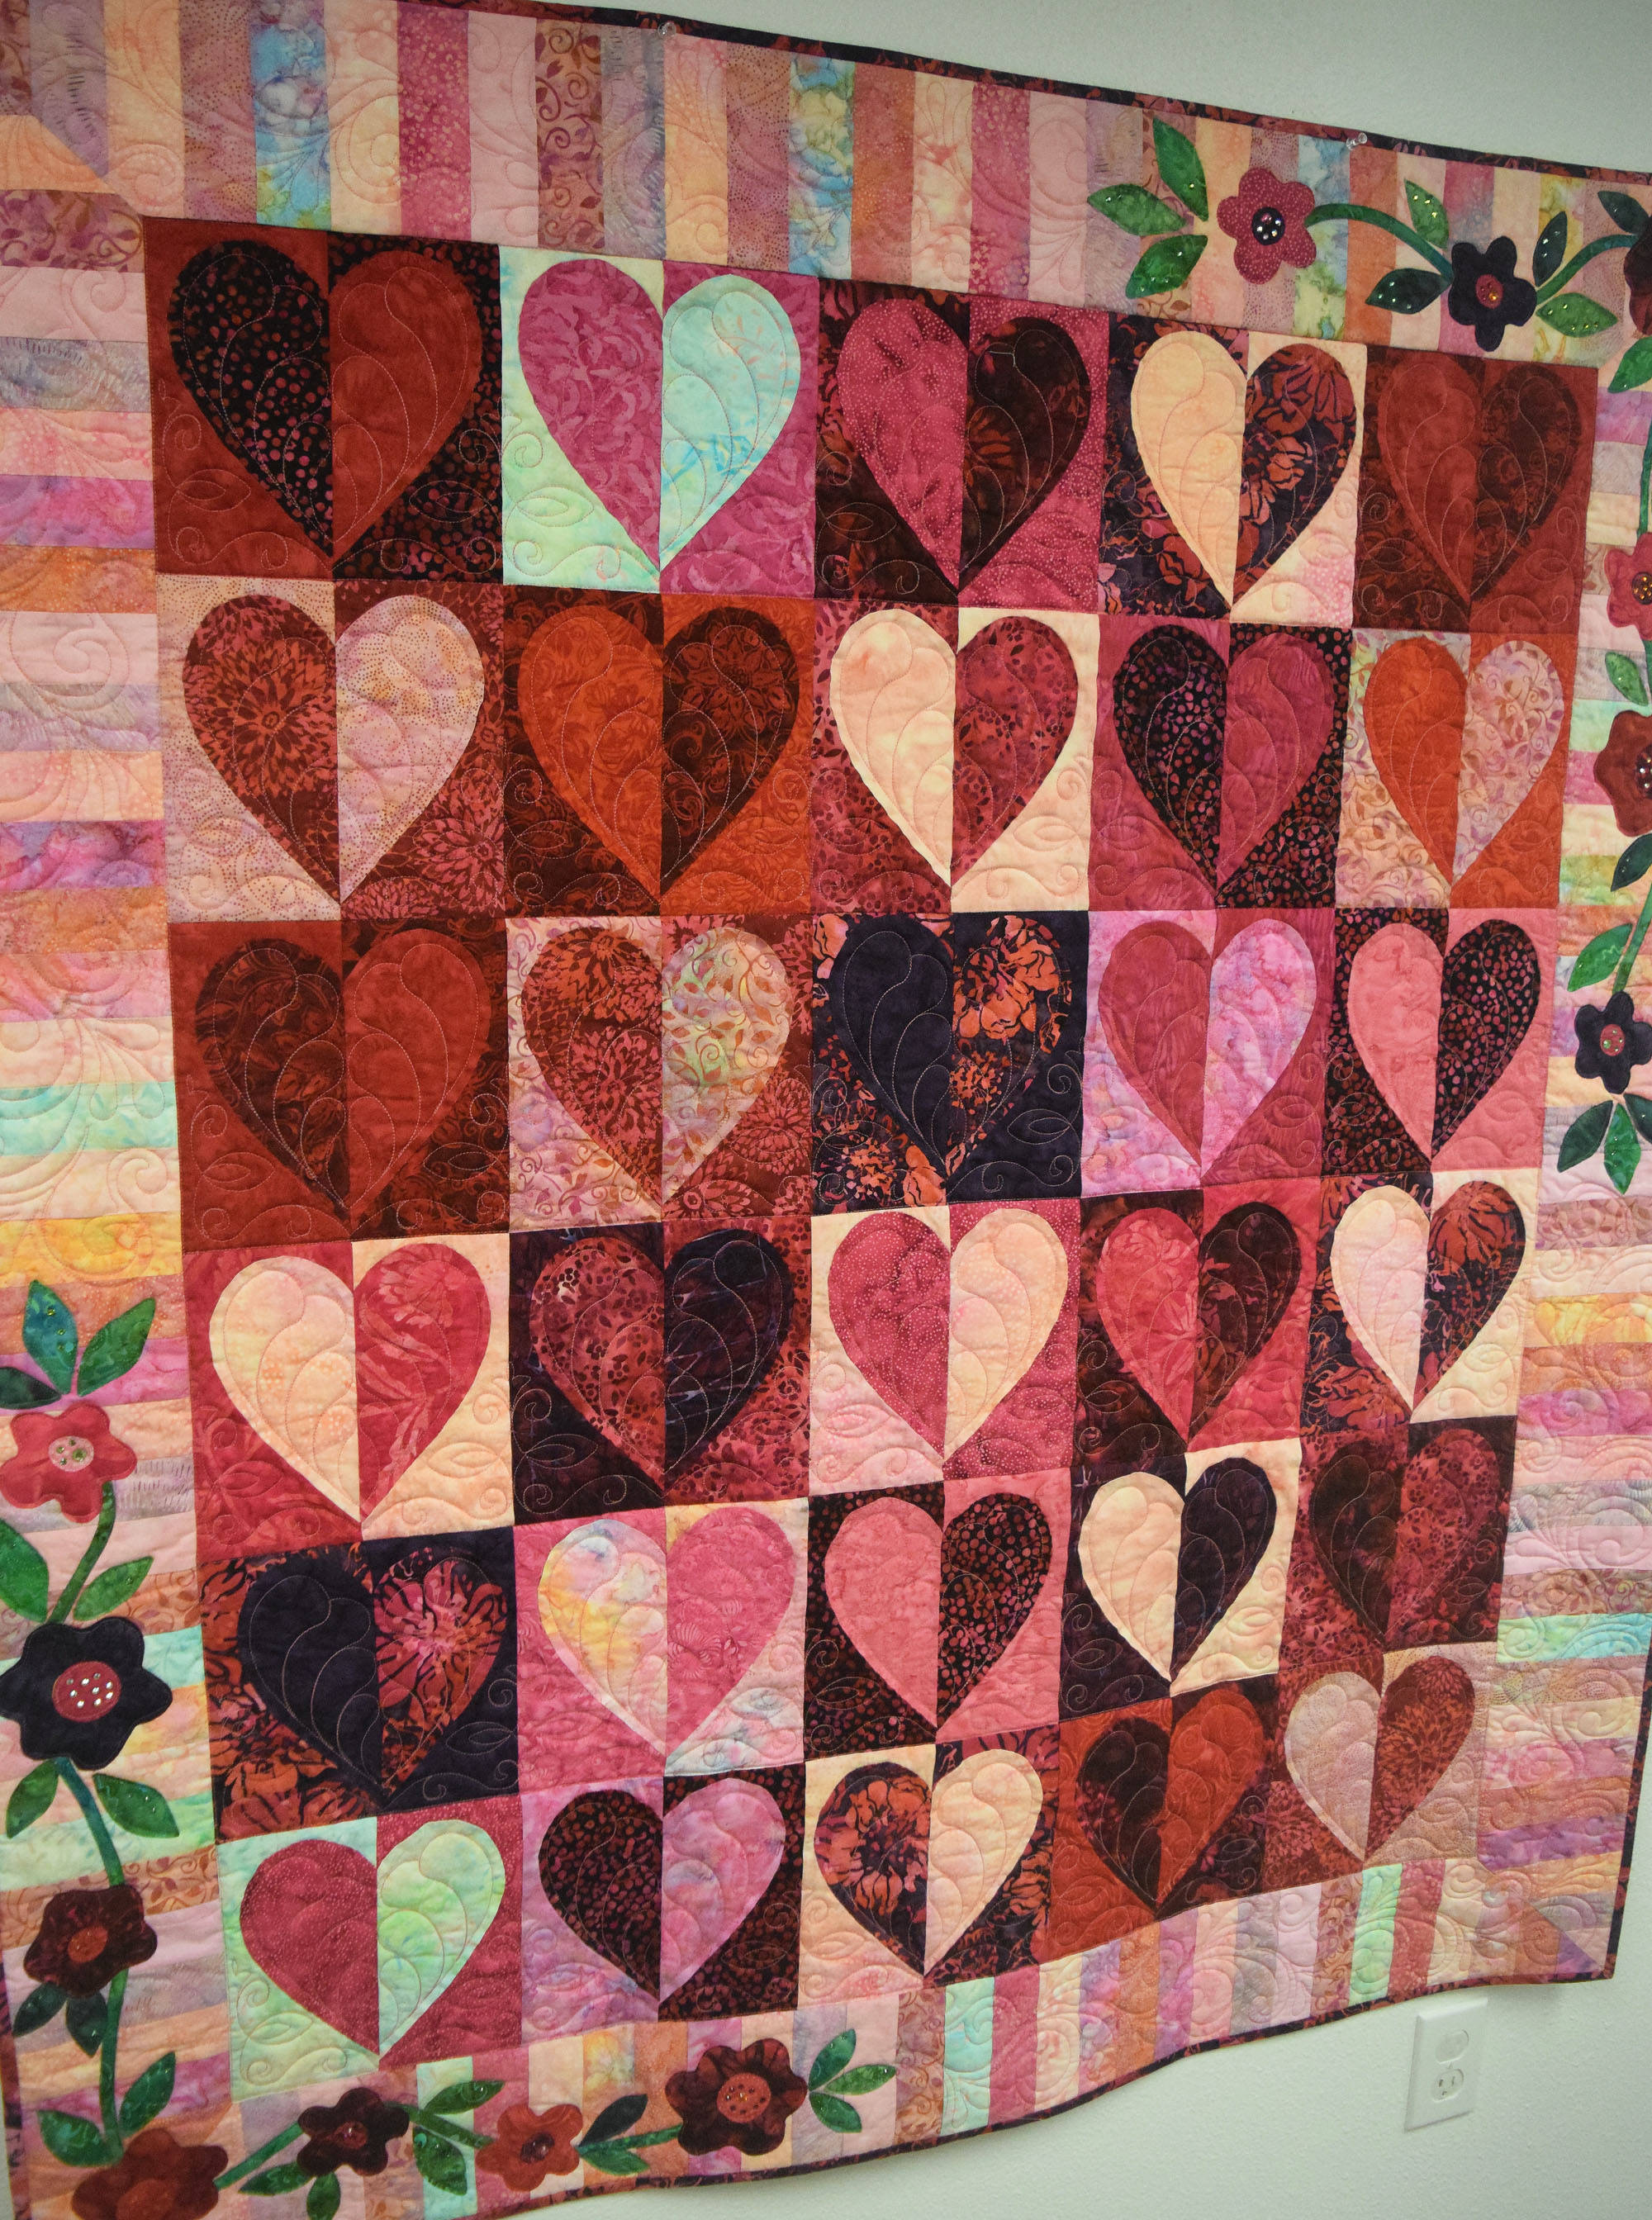 ”Heart to Heart”, a quilt produced by local artist Pat Reese, hangs on the wall Thursday at the Kenai Fine Arts Center. (Photo by Joey Klecka/Peninsula Clarion)